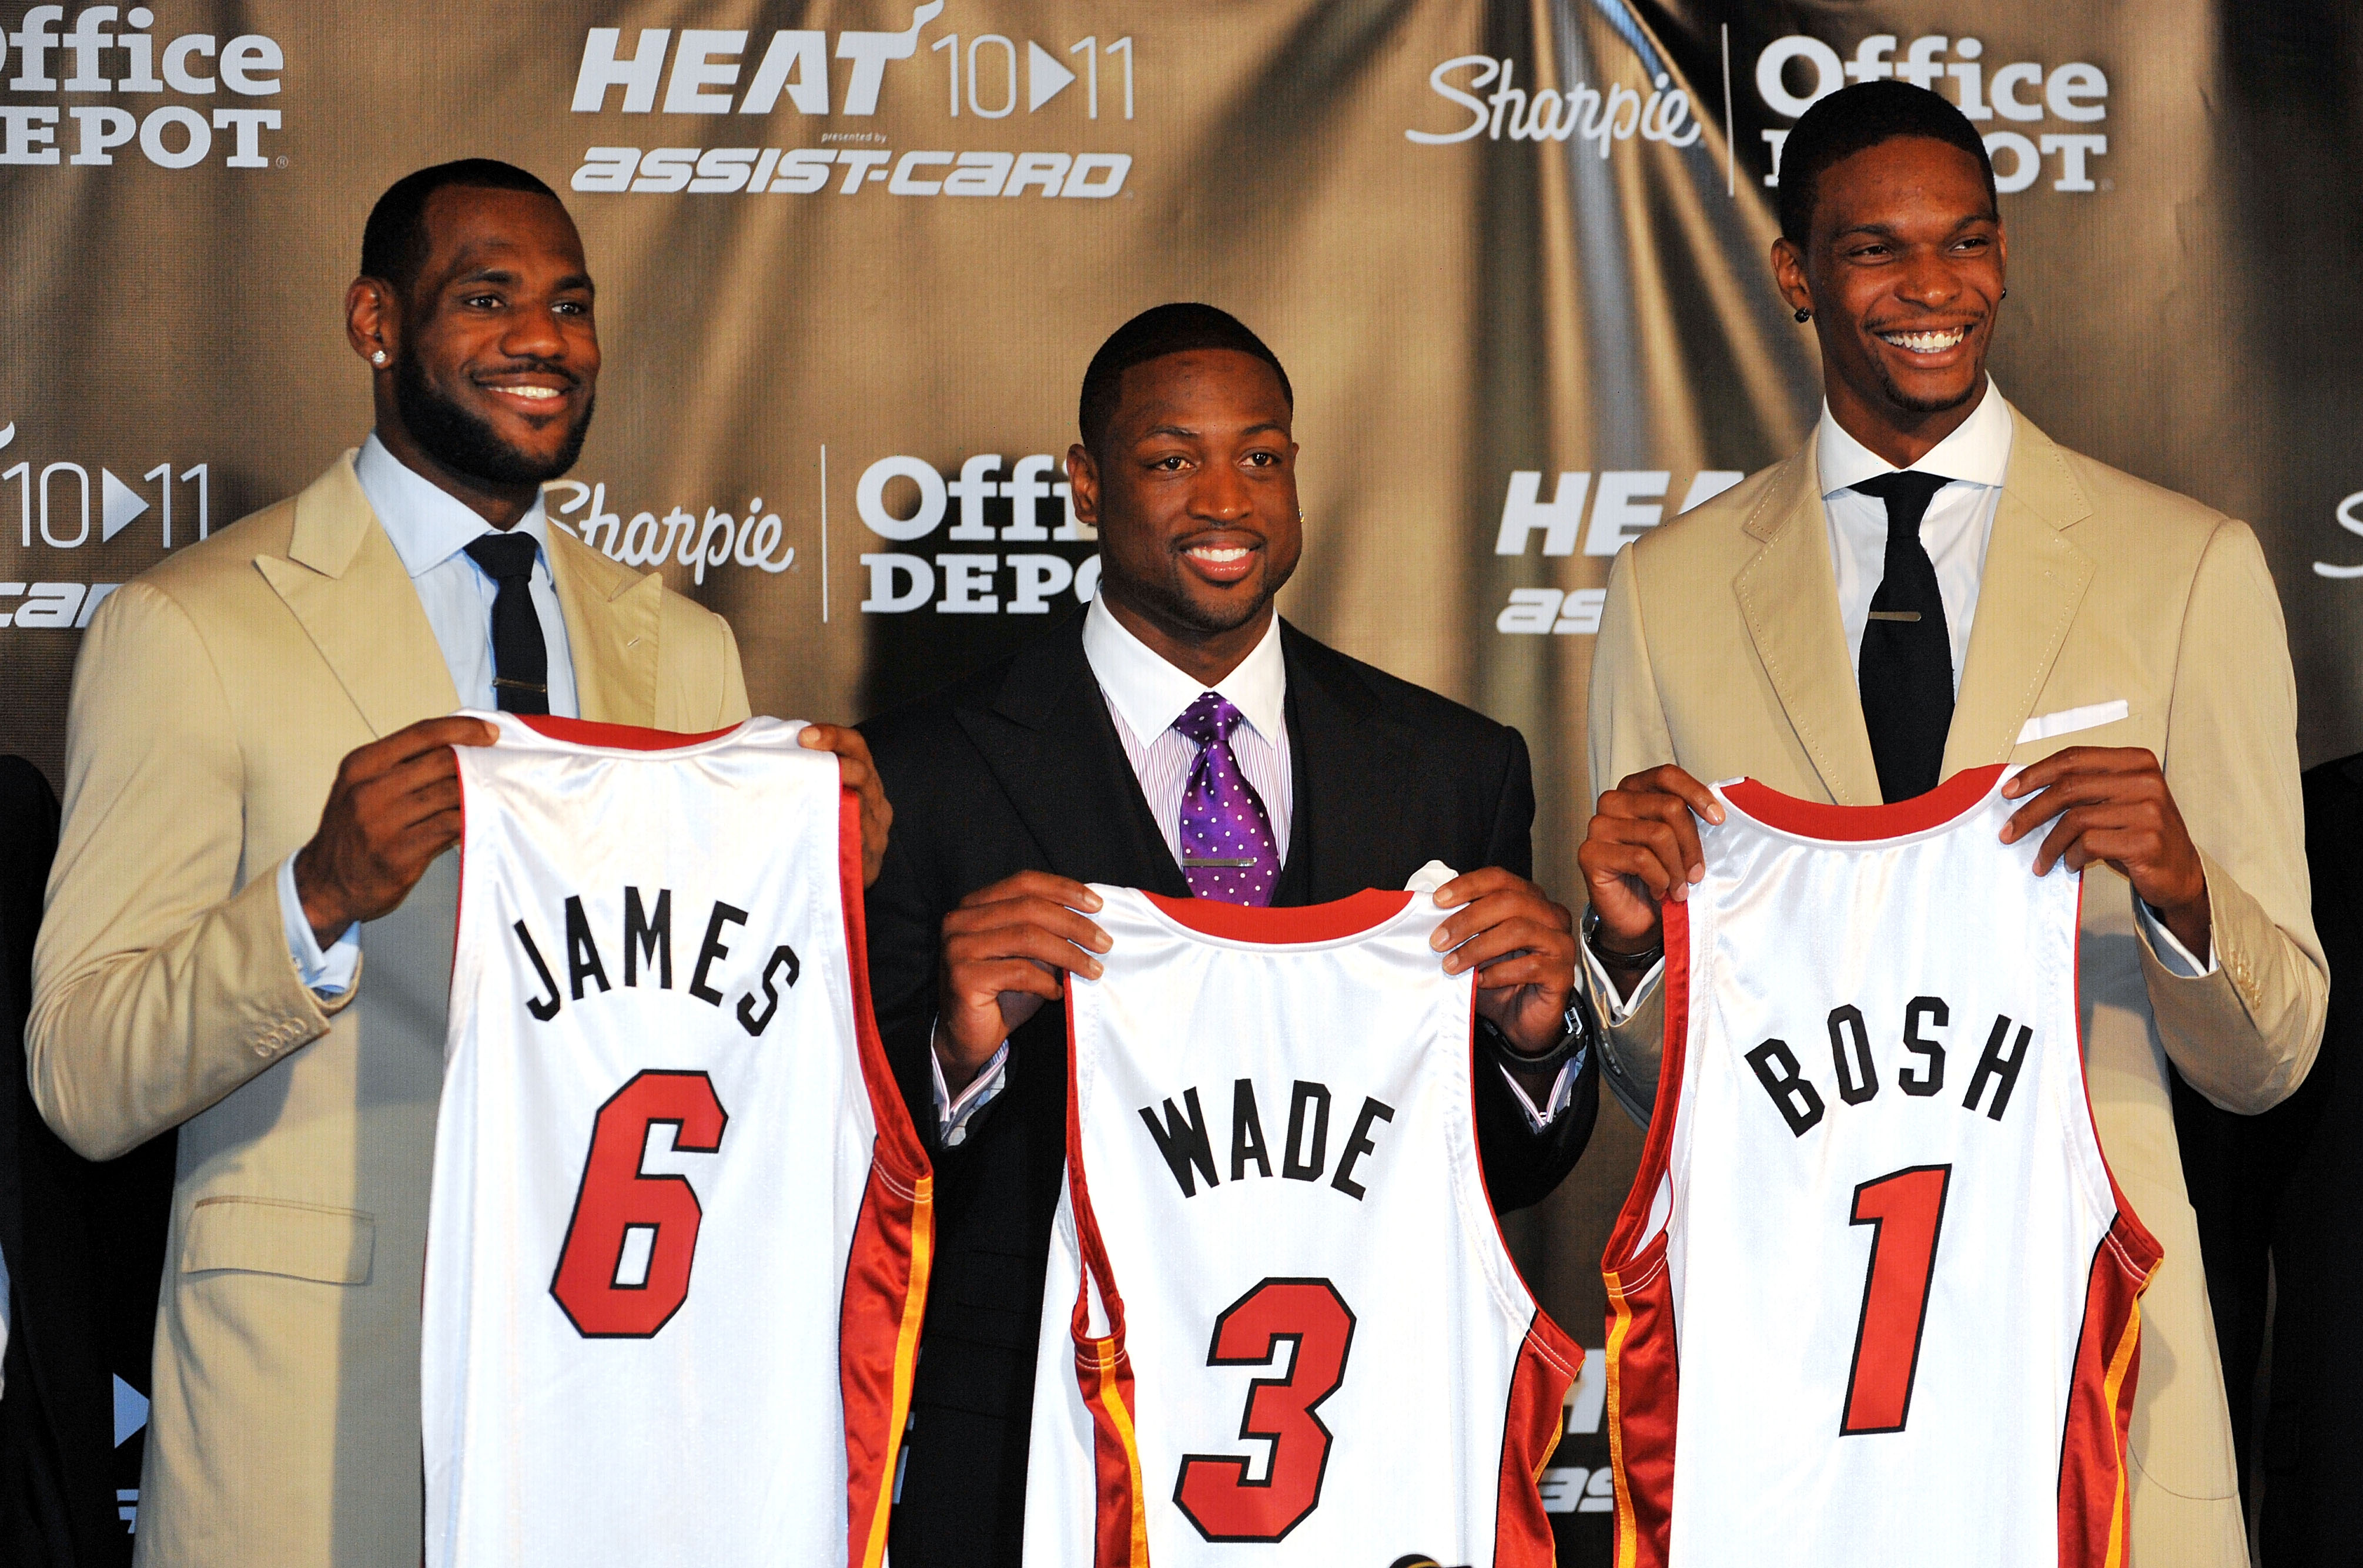 MIAMI - JULY 09:  LeBron James #6, Dwyane Wade #3 and Chris Bosh #1 of the Miami Heat show off their new game jerseys before a press conference after a welcome party at American Airlines Arena on July 9, 2010 in Miami, Florida.  (Photo by Doug Benc/Getty